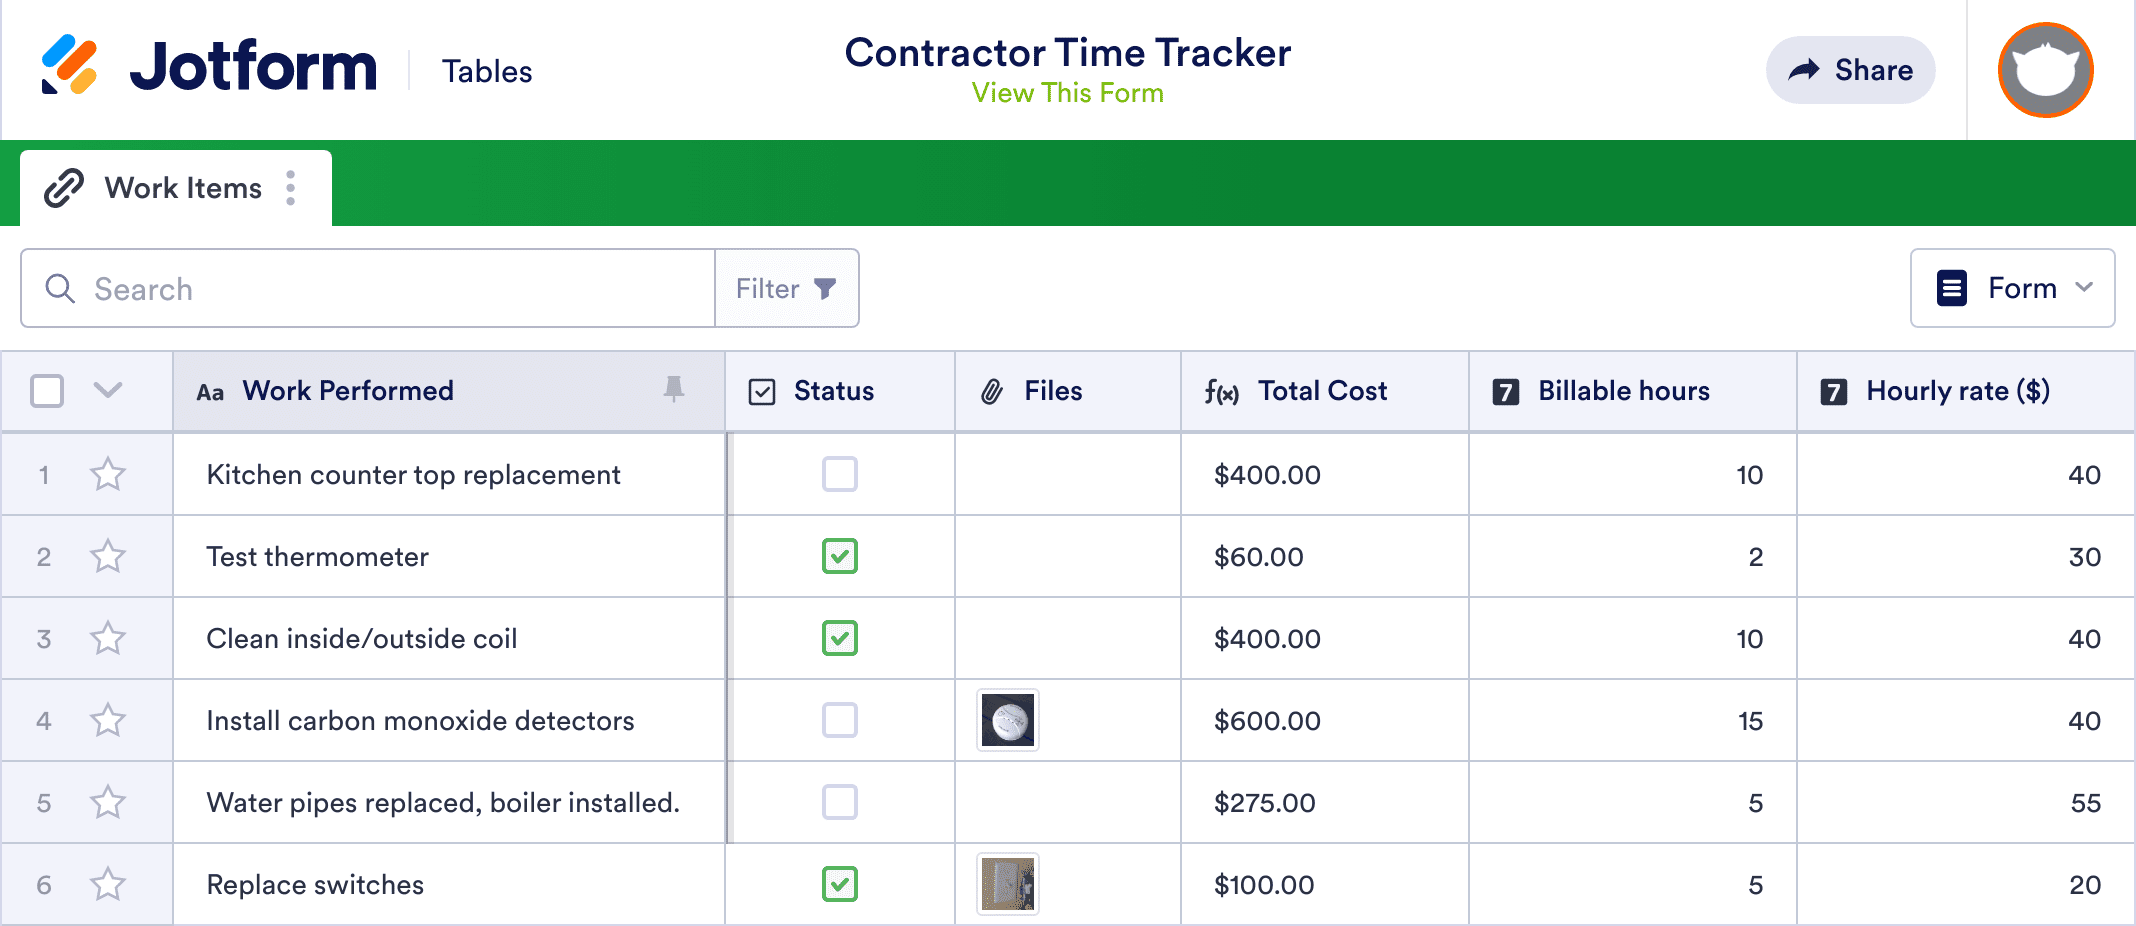 Contractor Time Tracker